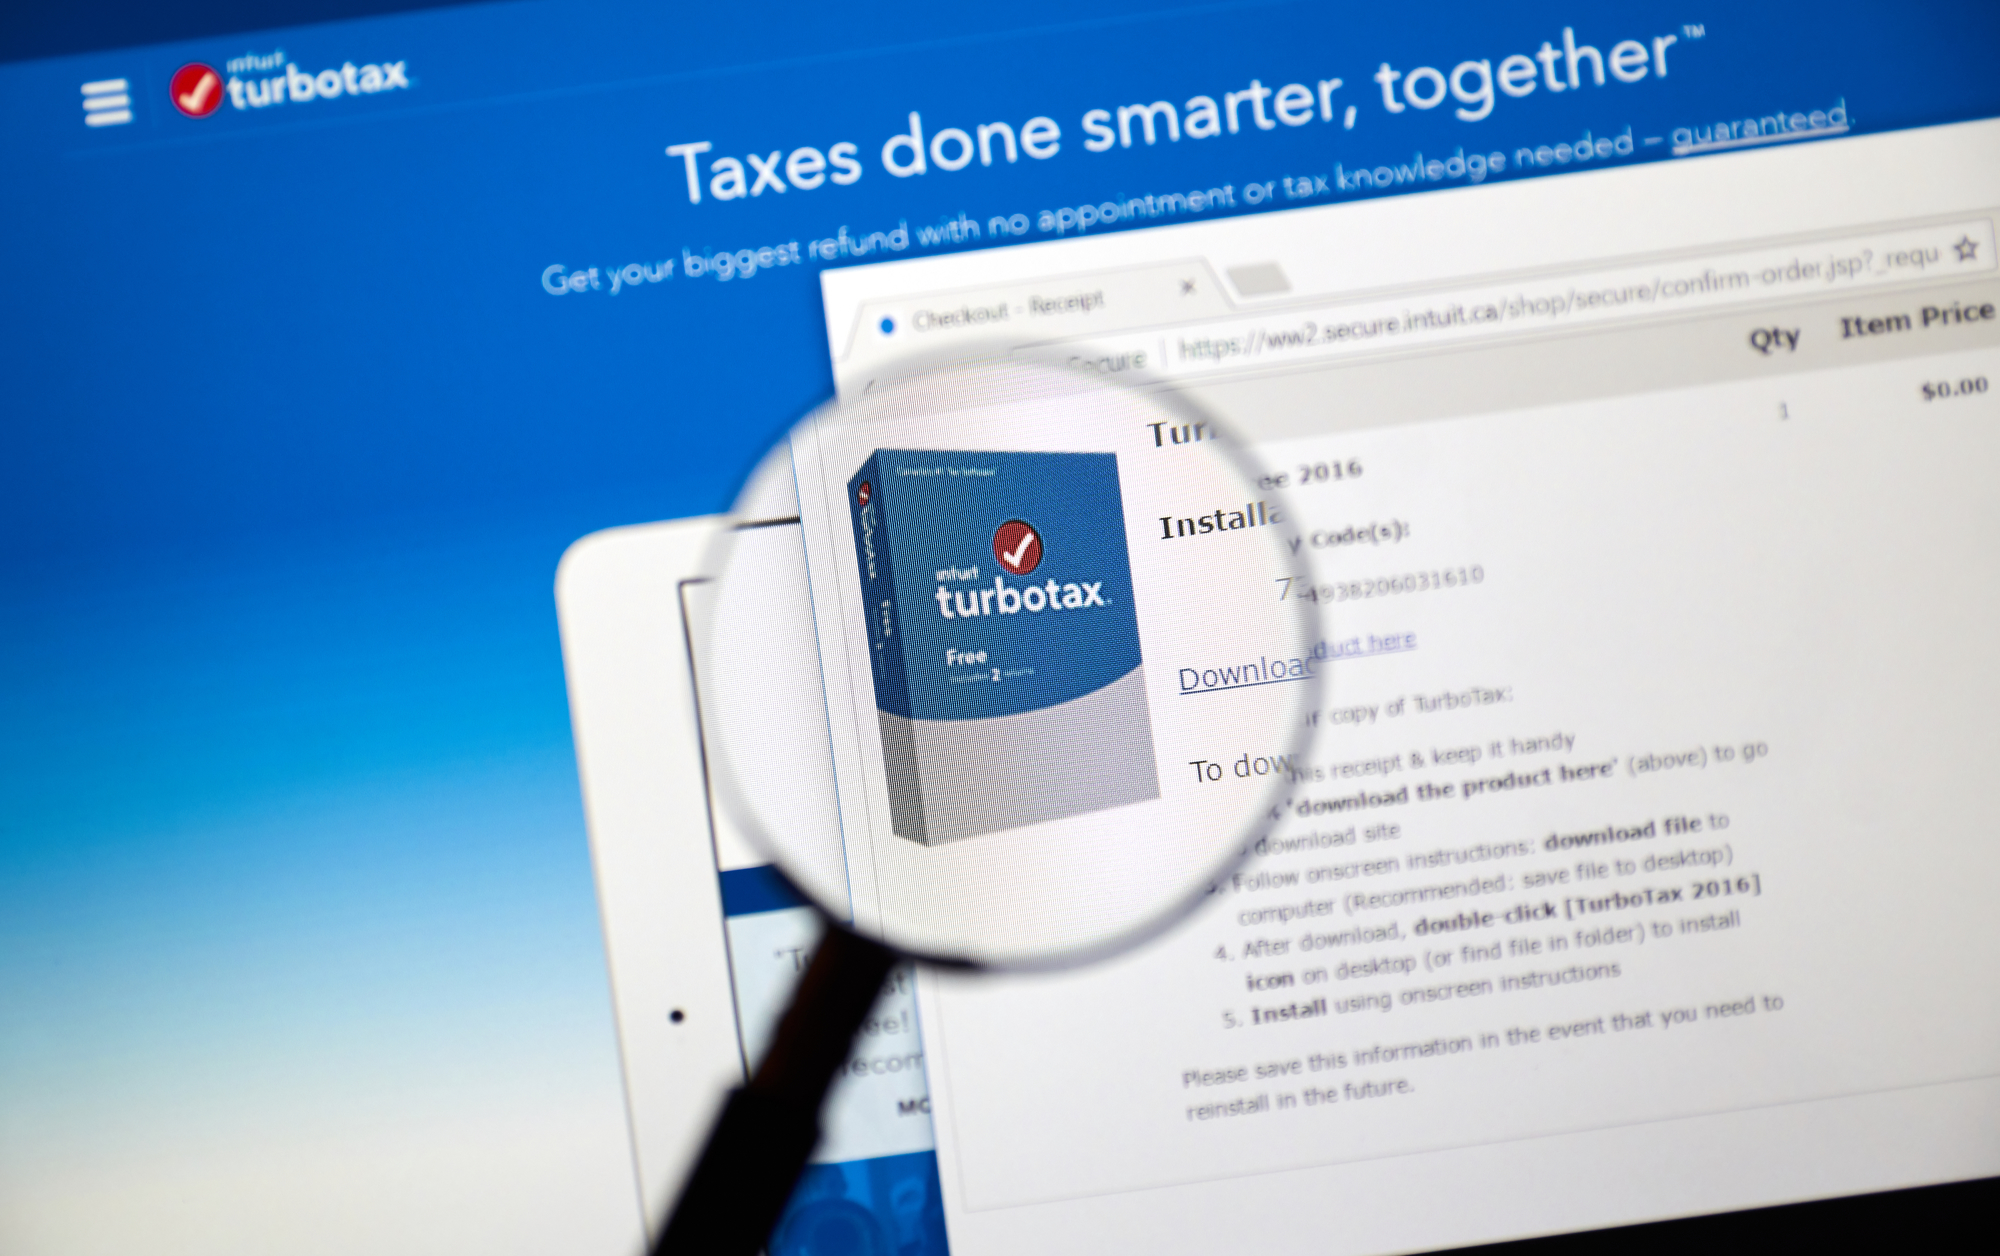 2014 turbotax software 19.99 download state